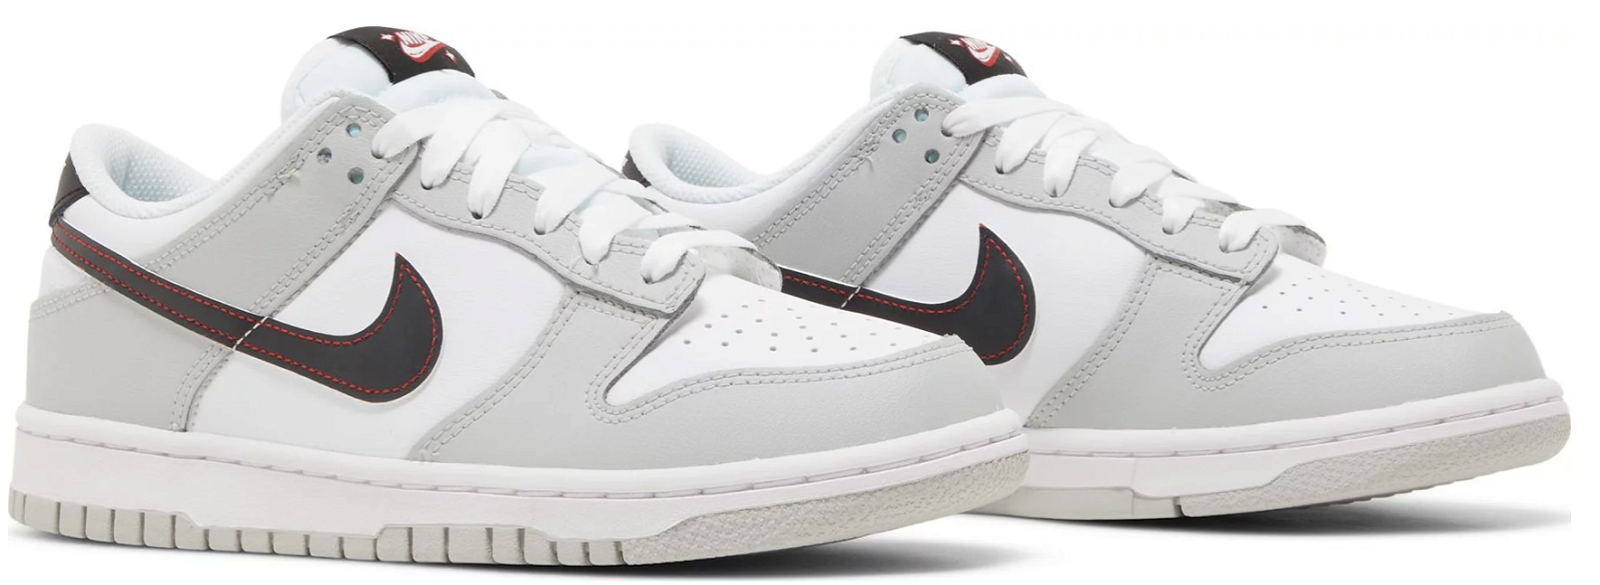 Dunk Low SE "Lottery Pack - Grey Fog" GS